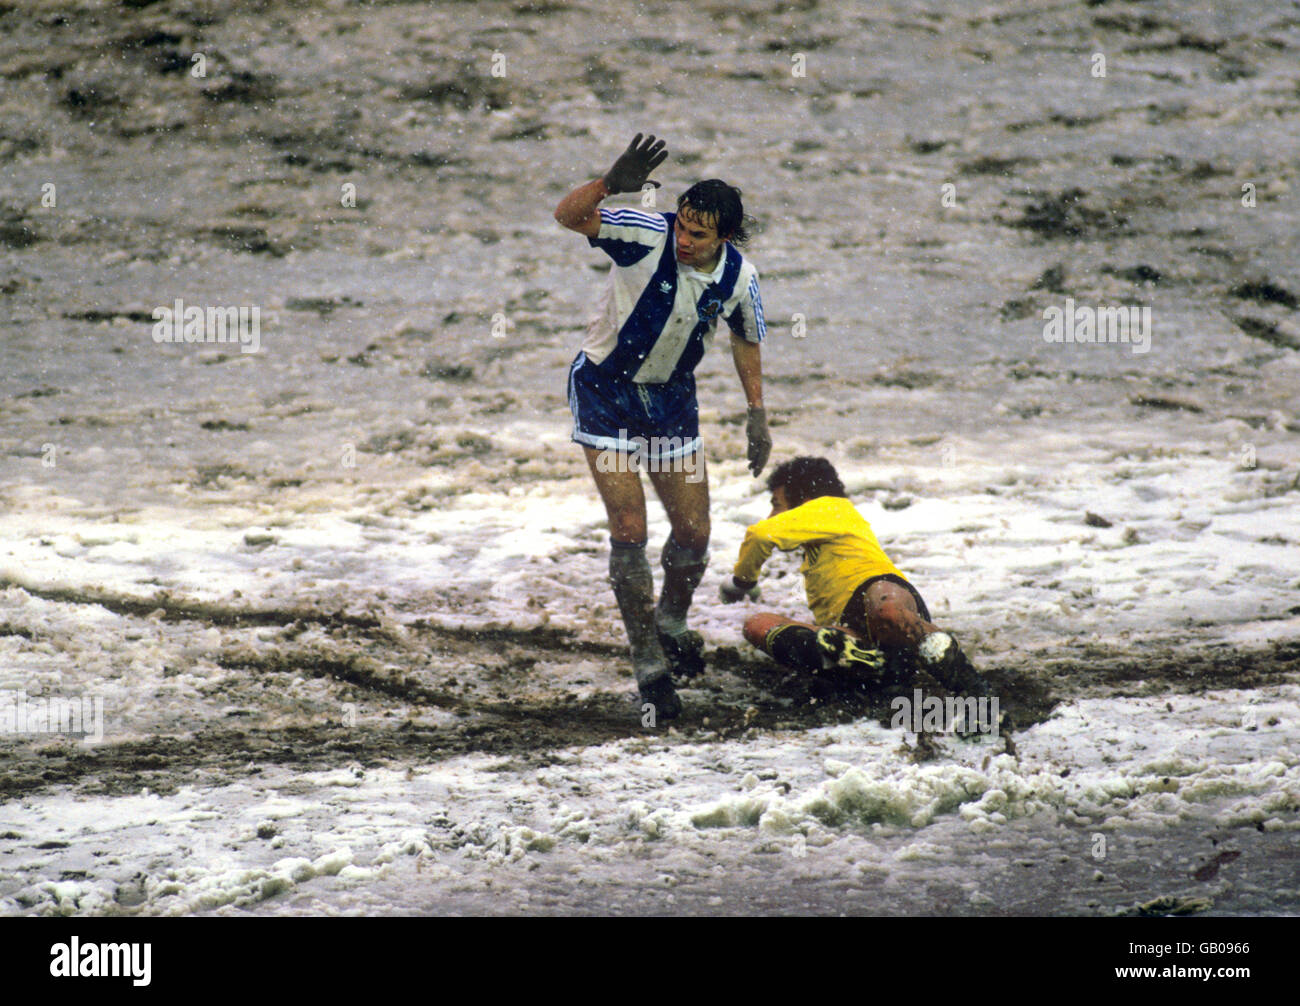 Soccer - Intercontinental Cup Final - Toyota Cup - FC Porto v C.A. Penarol - National Stadium - Tokyo. A Porto player protests his innocence as the players struggle in the extreme conditions Stock Photo